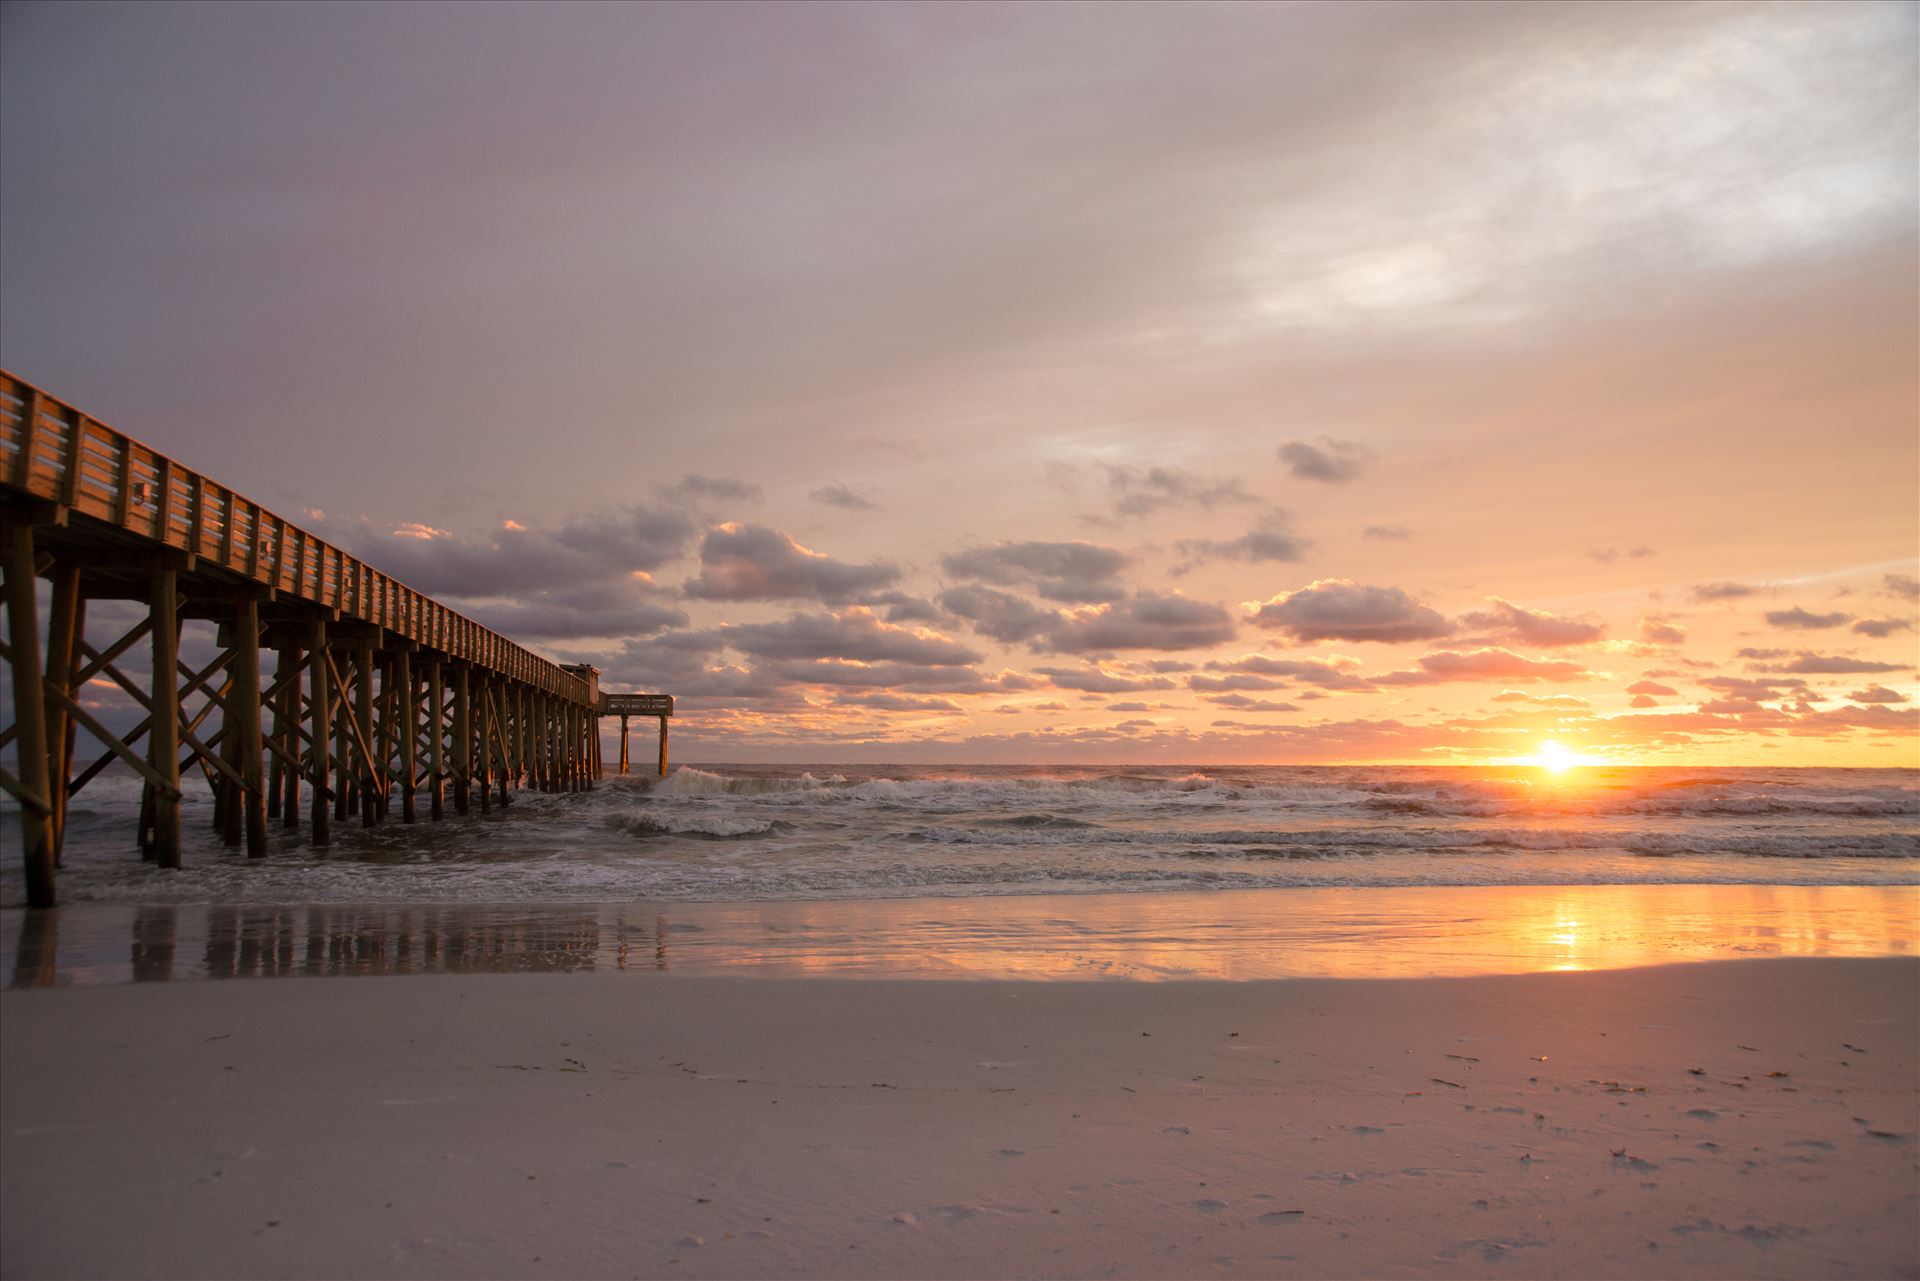 DSC_6788-78.jpg - St. Andrew's State Park in Panama City Beach Florida has the most beautiful sunsets for your photography session, whether you want family photos, maternity photos, children or weddings...this is the place to be!  by Holly Naughton Photography